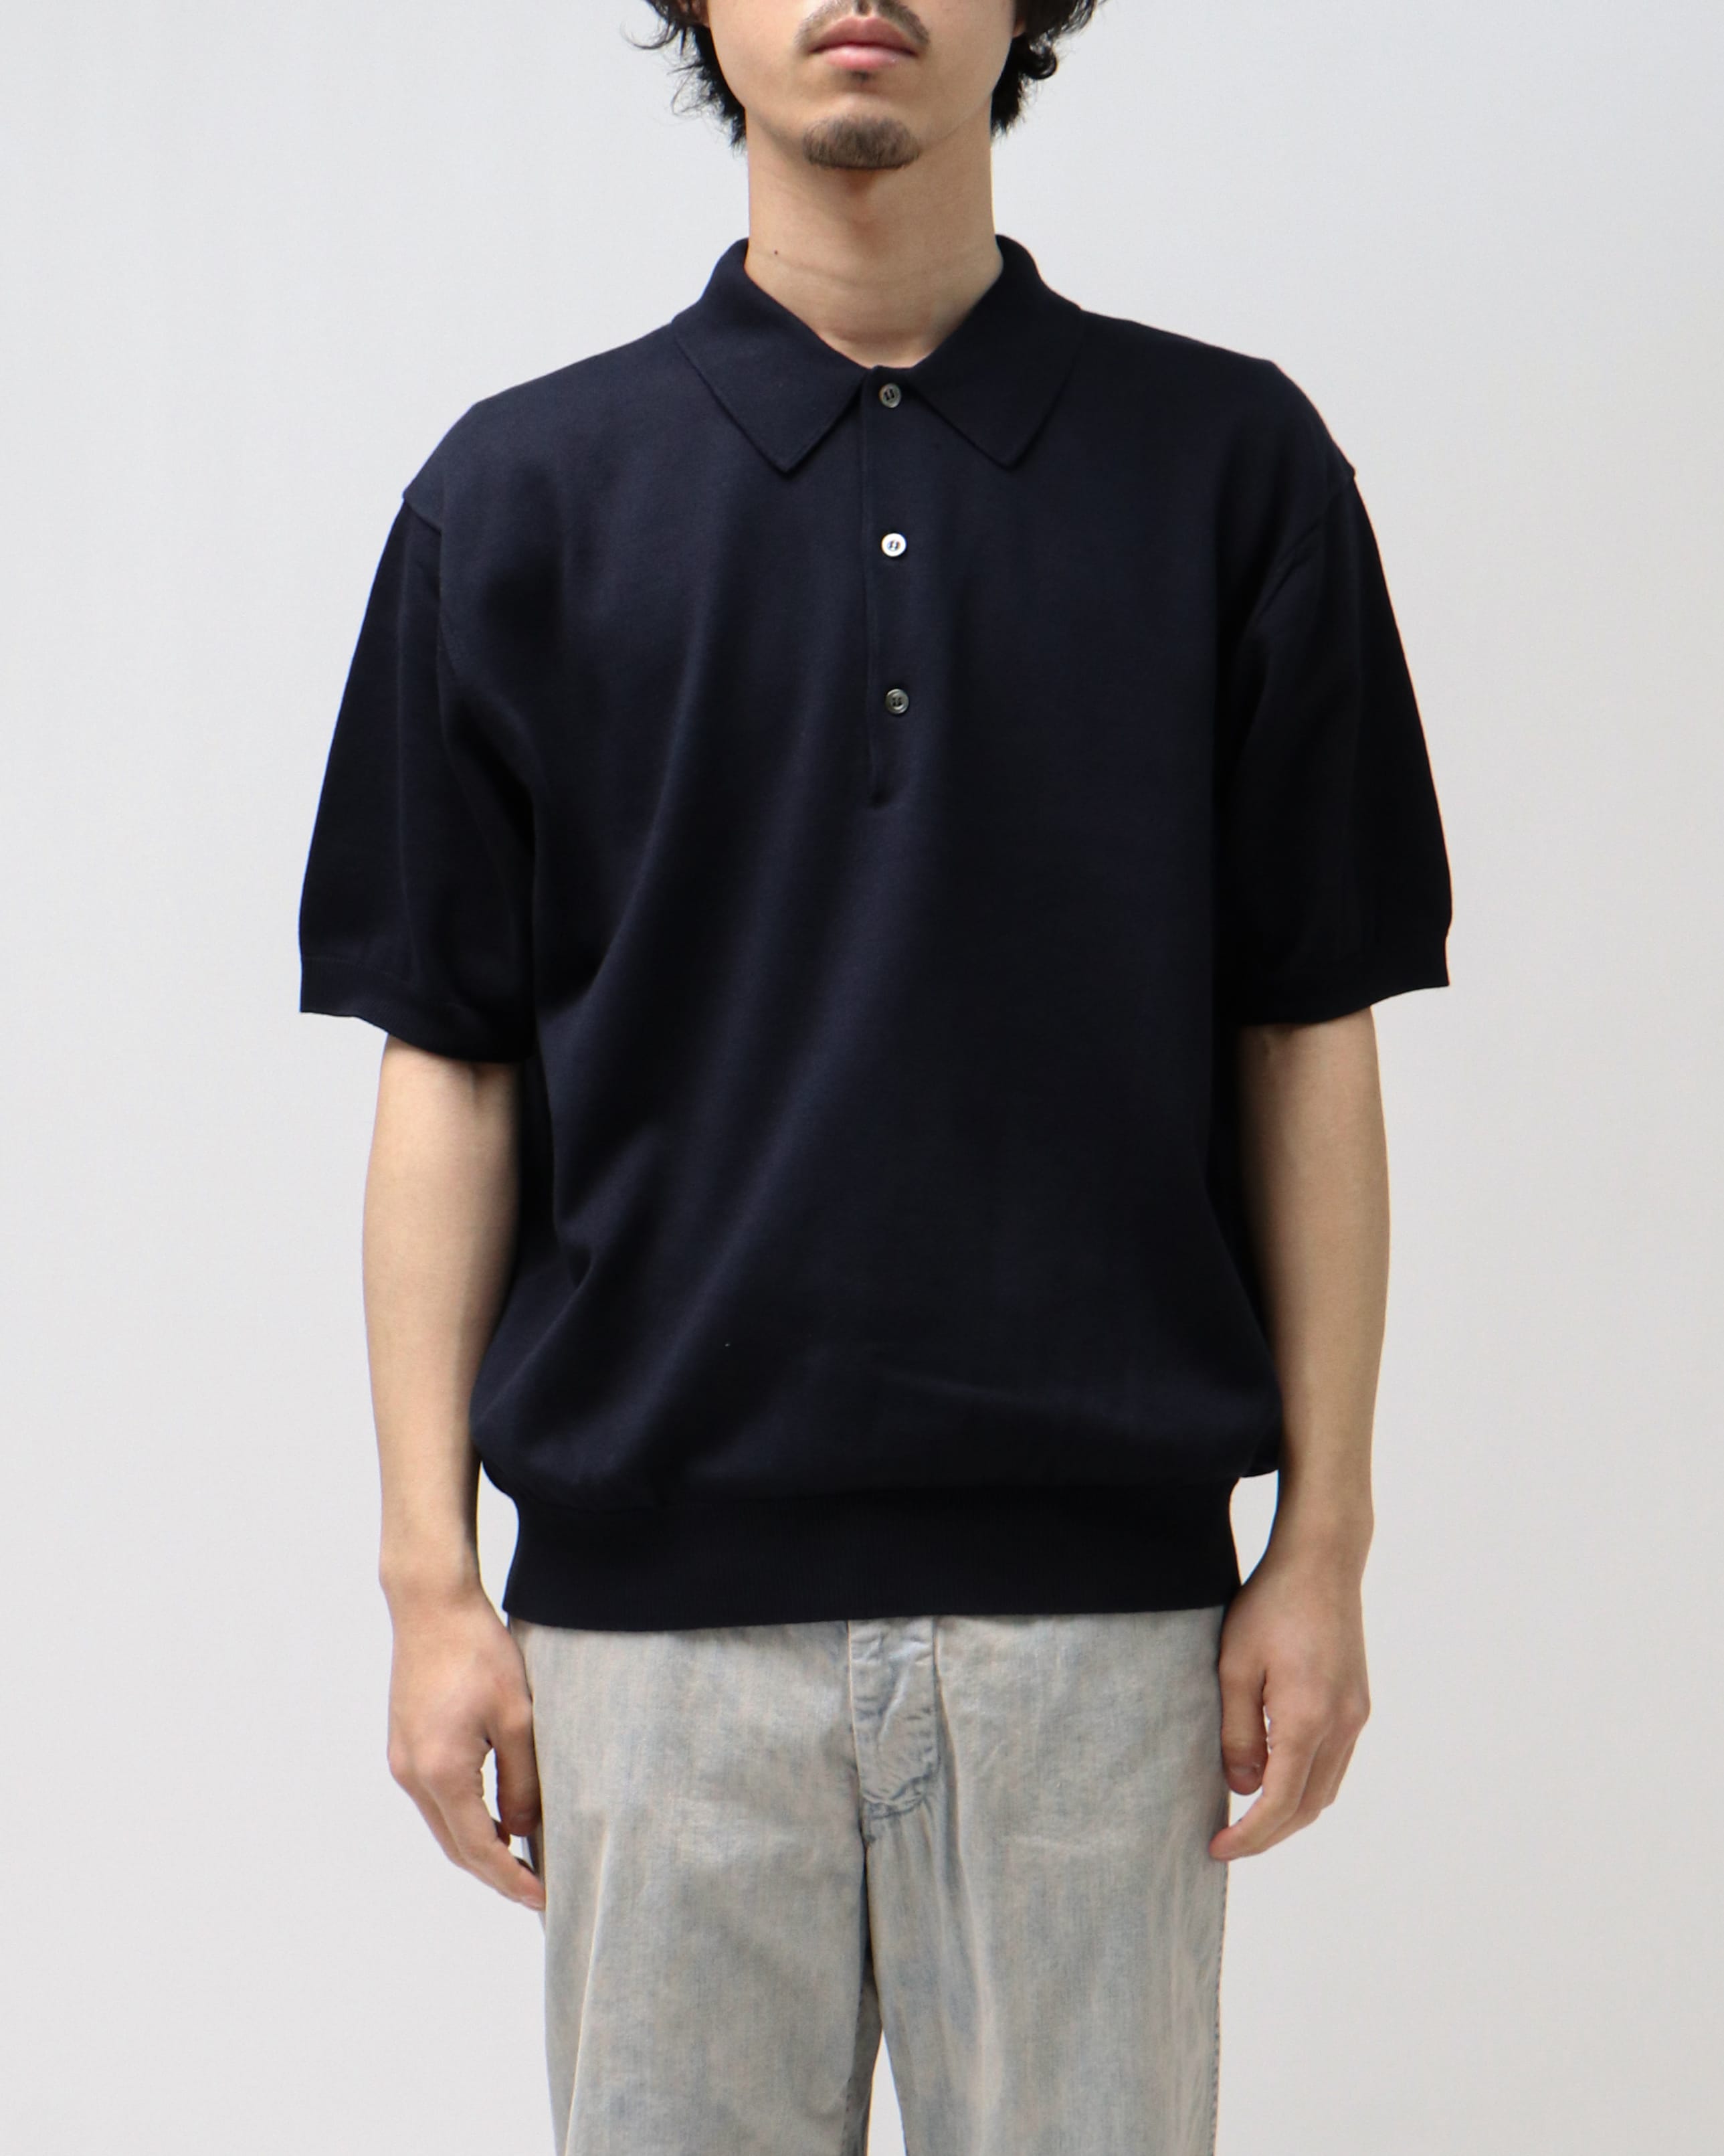 Cotton Knit S/S Polo Shirts – TIME AFTER TIME